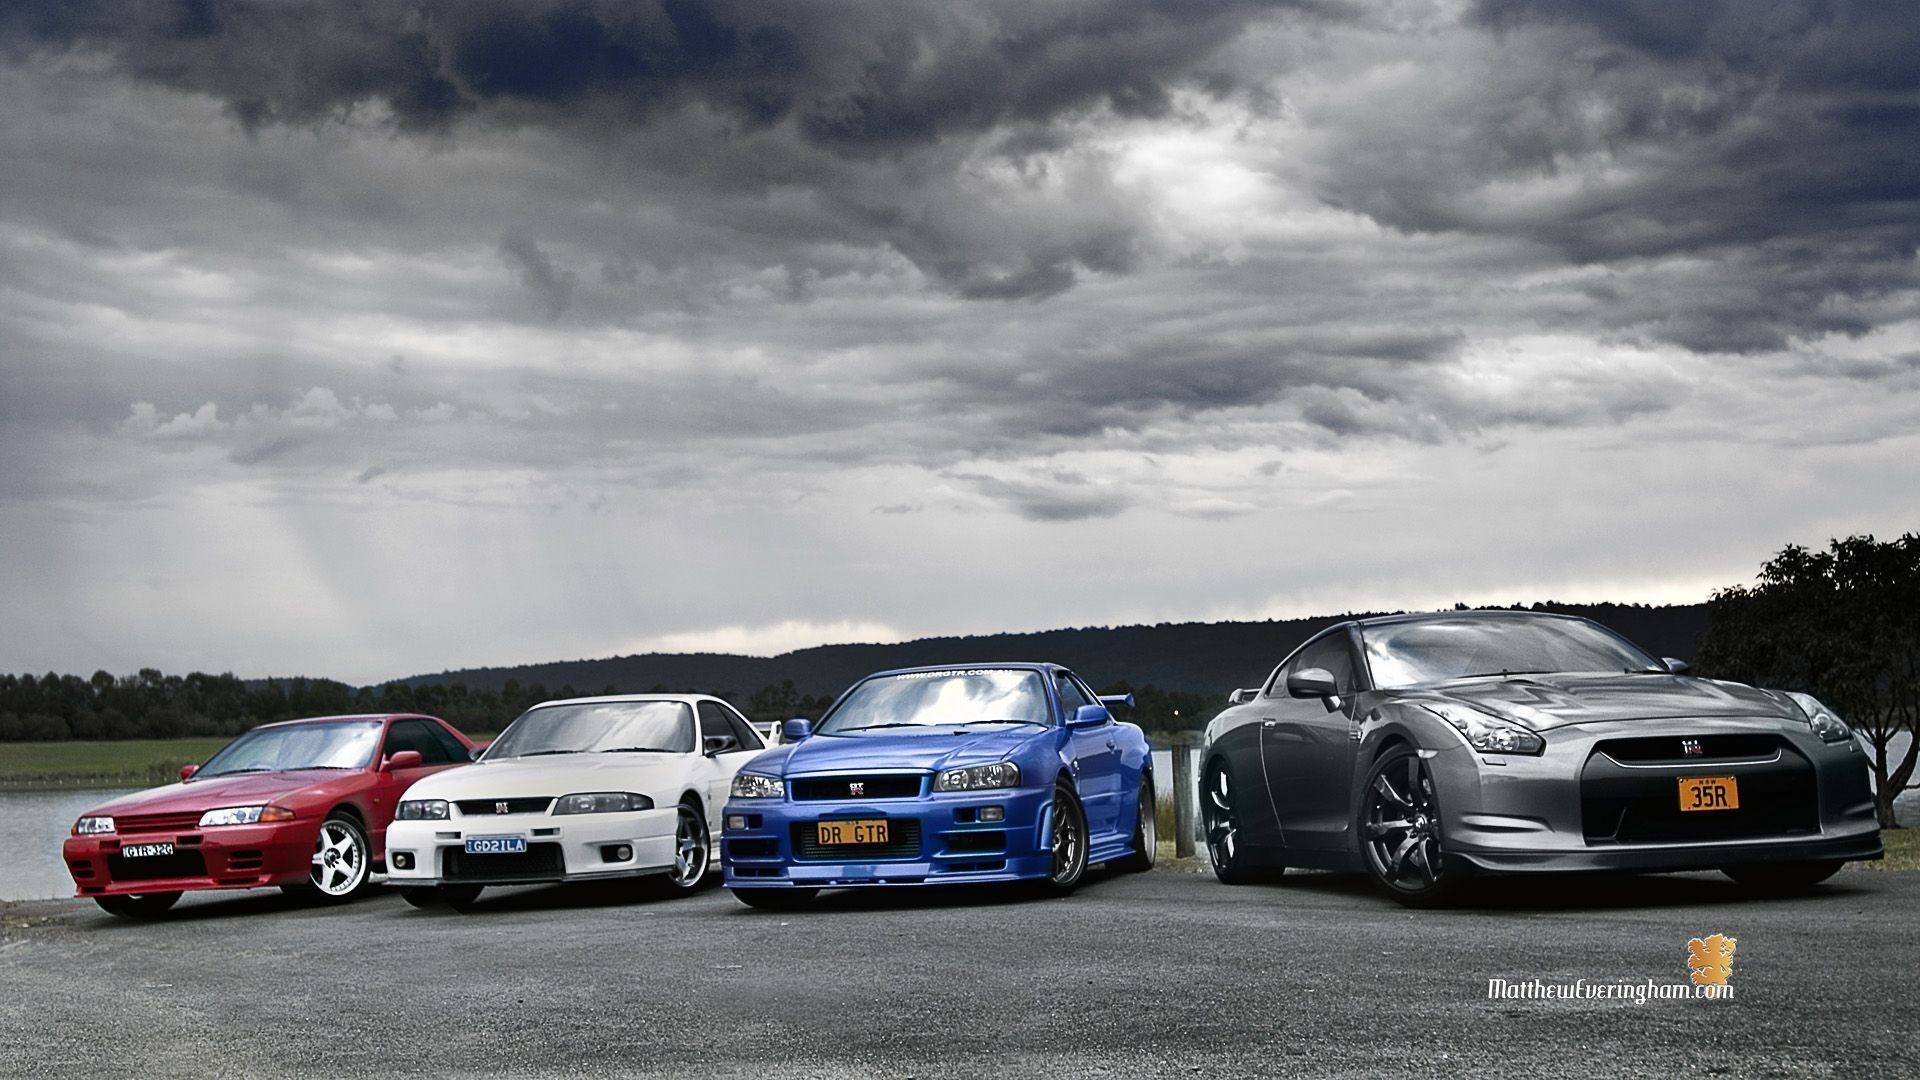 R34 Wallpapers Group (81+)